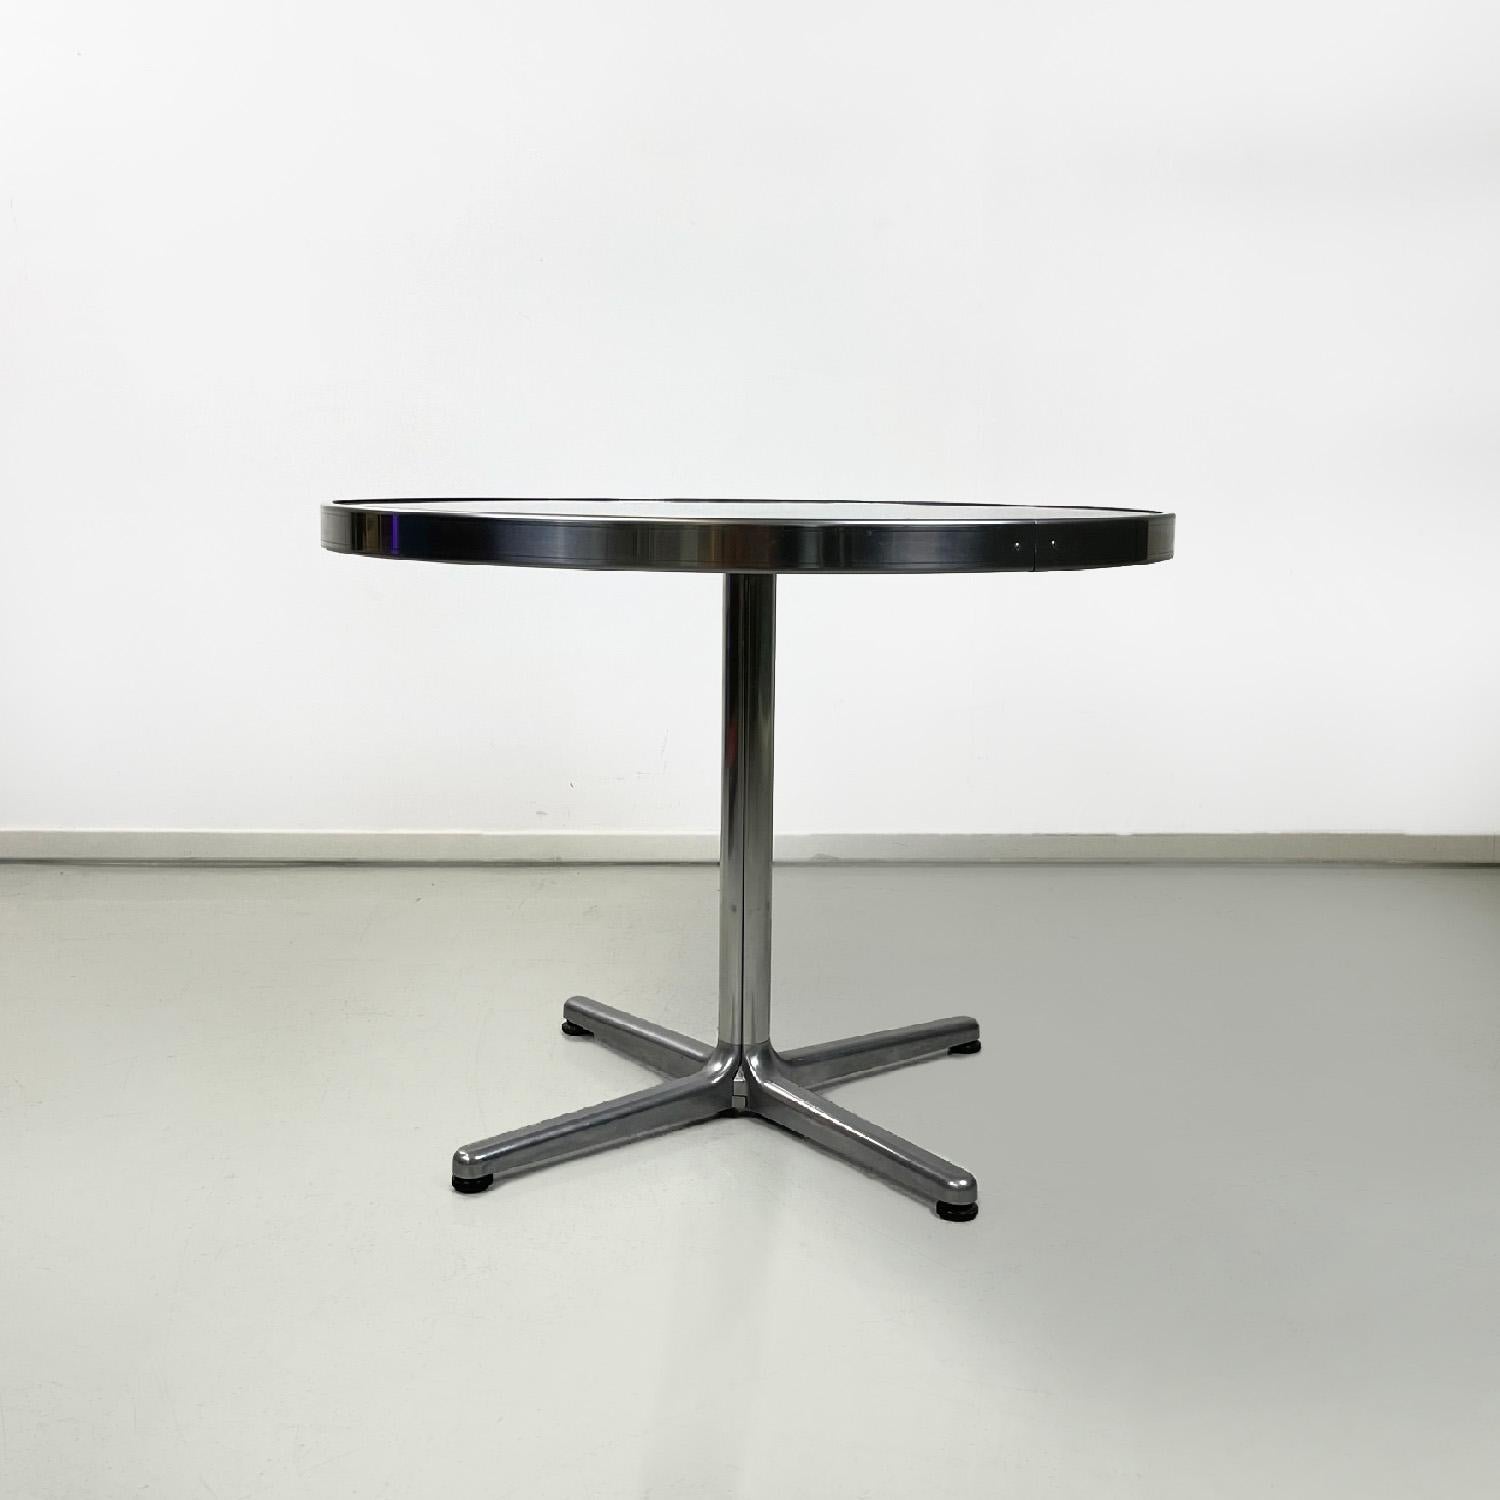 Italian modern round steel dining table, 1970s
Dining table with round top, entirely in steel. The top is embraced along its entire circumference by a sheet, also in steel, which folds over the top to create an edge. It has a central leg from which